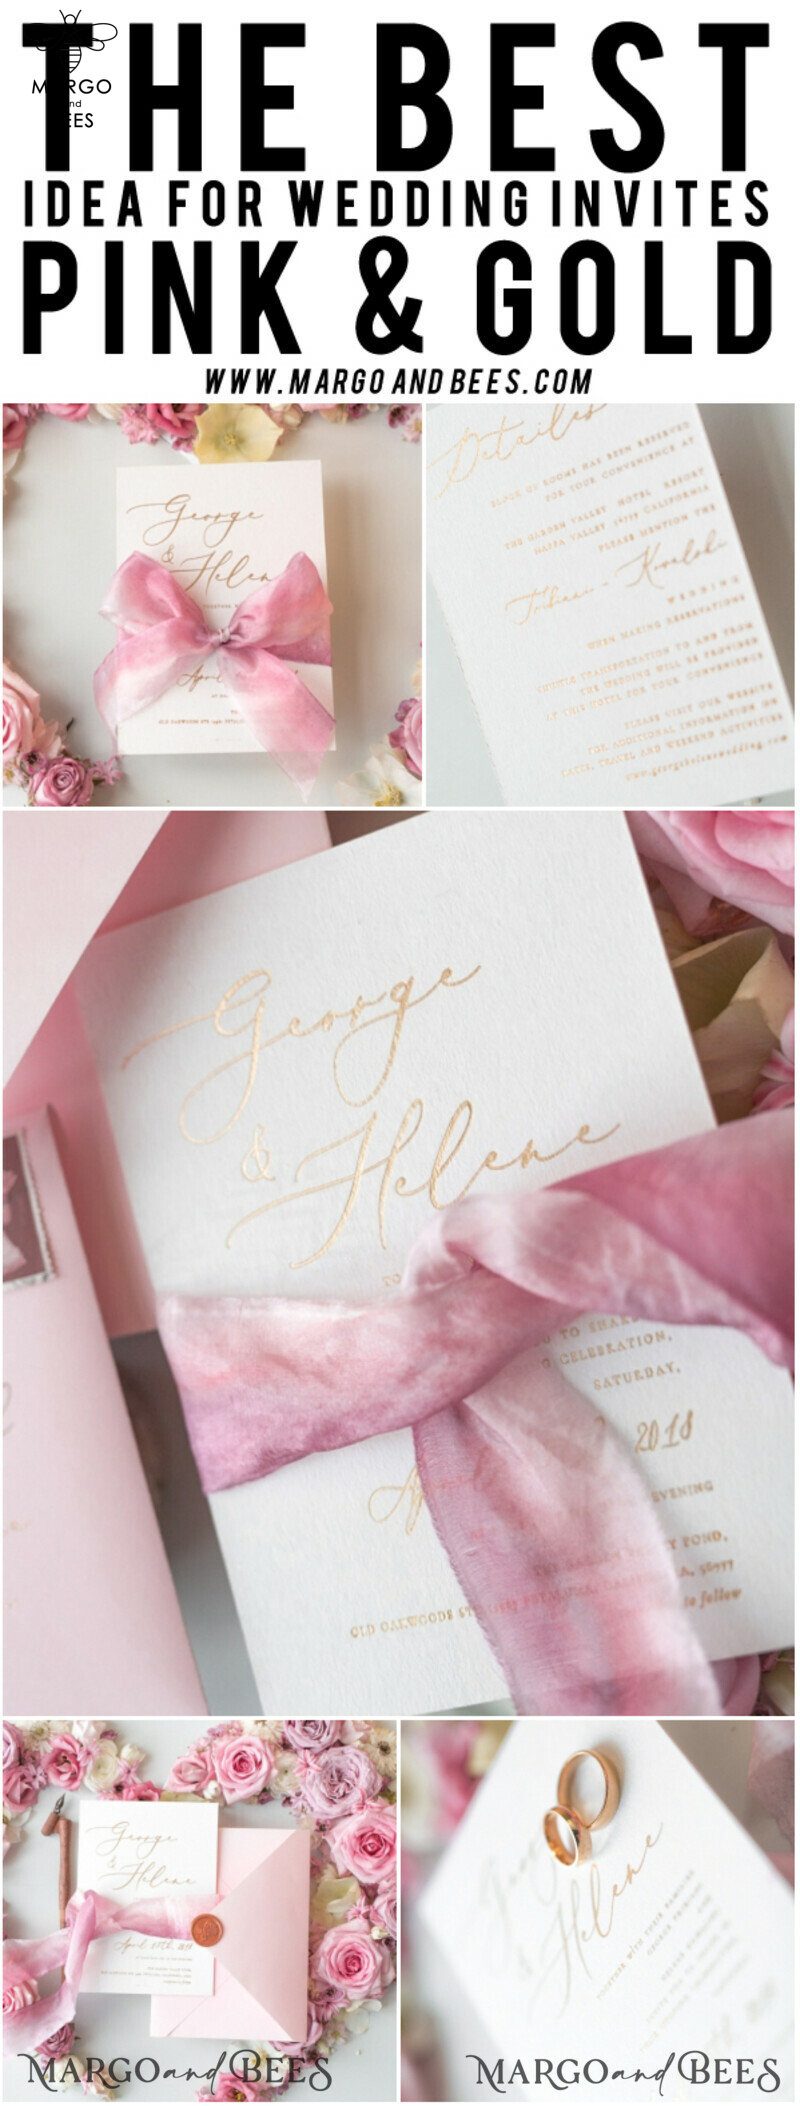 Romantic Blush Pink Wedding Invitations: Vintage Floral Wedding Invitation Suite with Elegant Wedding Cards and Hand Dyed Bow - Glamour Peony Wedding Stationery-51